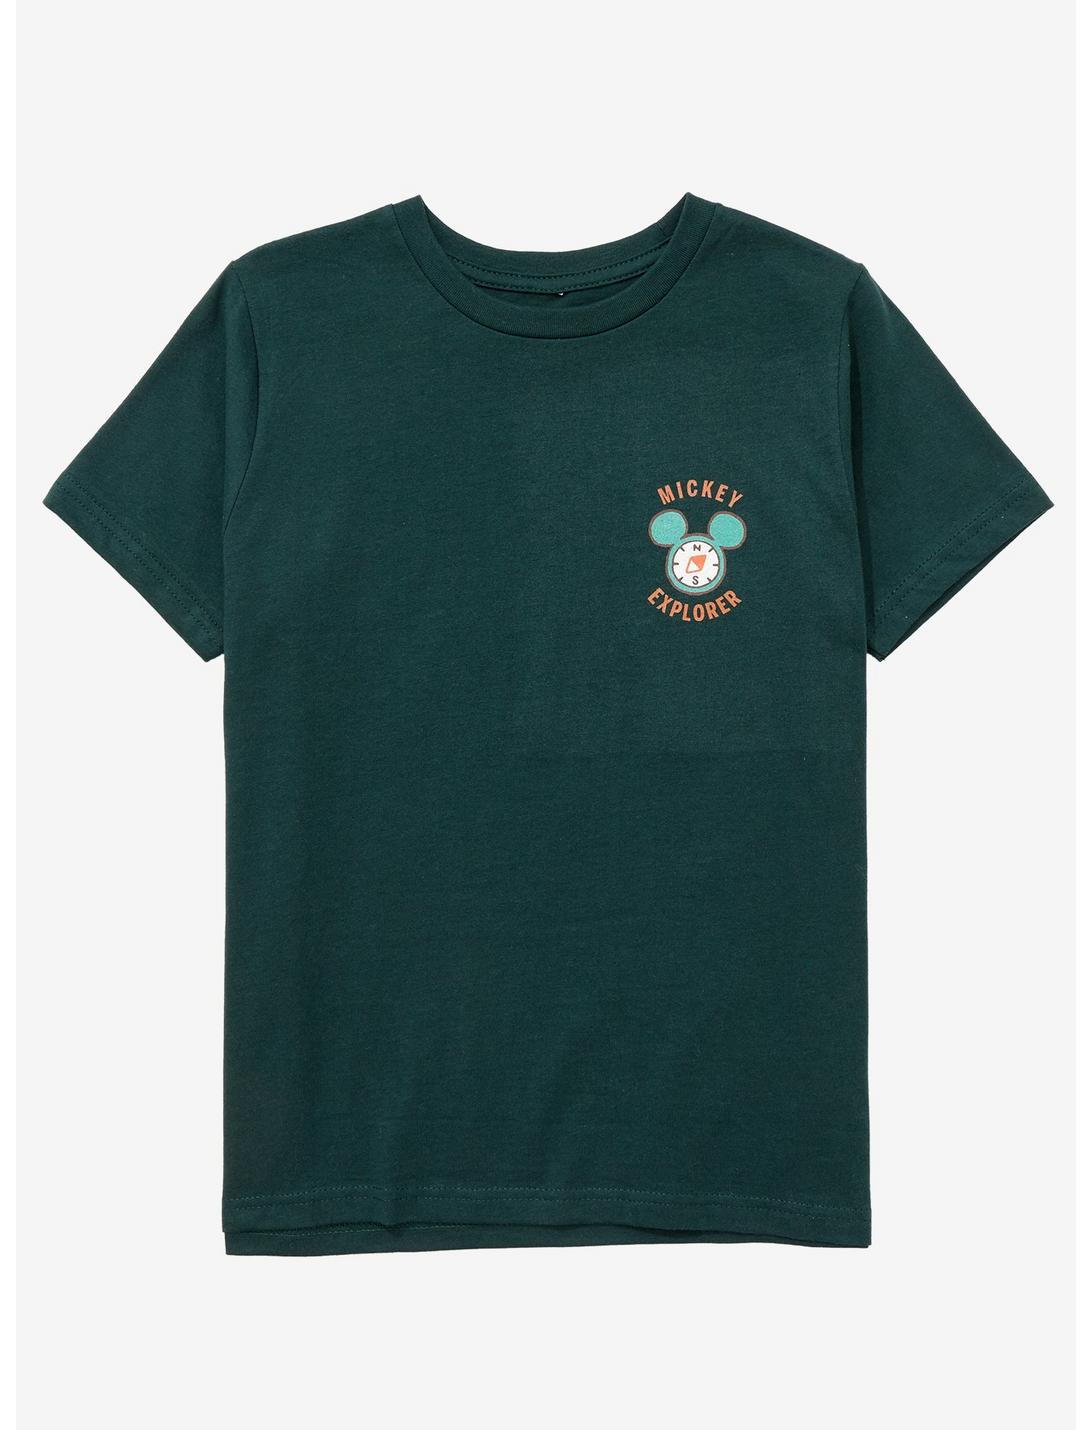 Disney Mickey Explorer Wild Outdoors Youth T-Shirt - BoxLunch Exclusive, LIGHT GREEN, hi-res